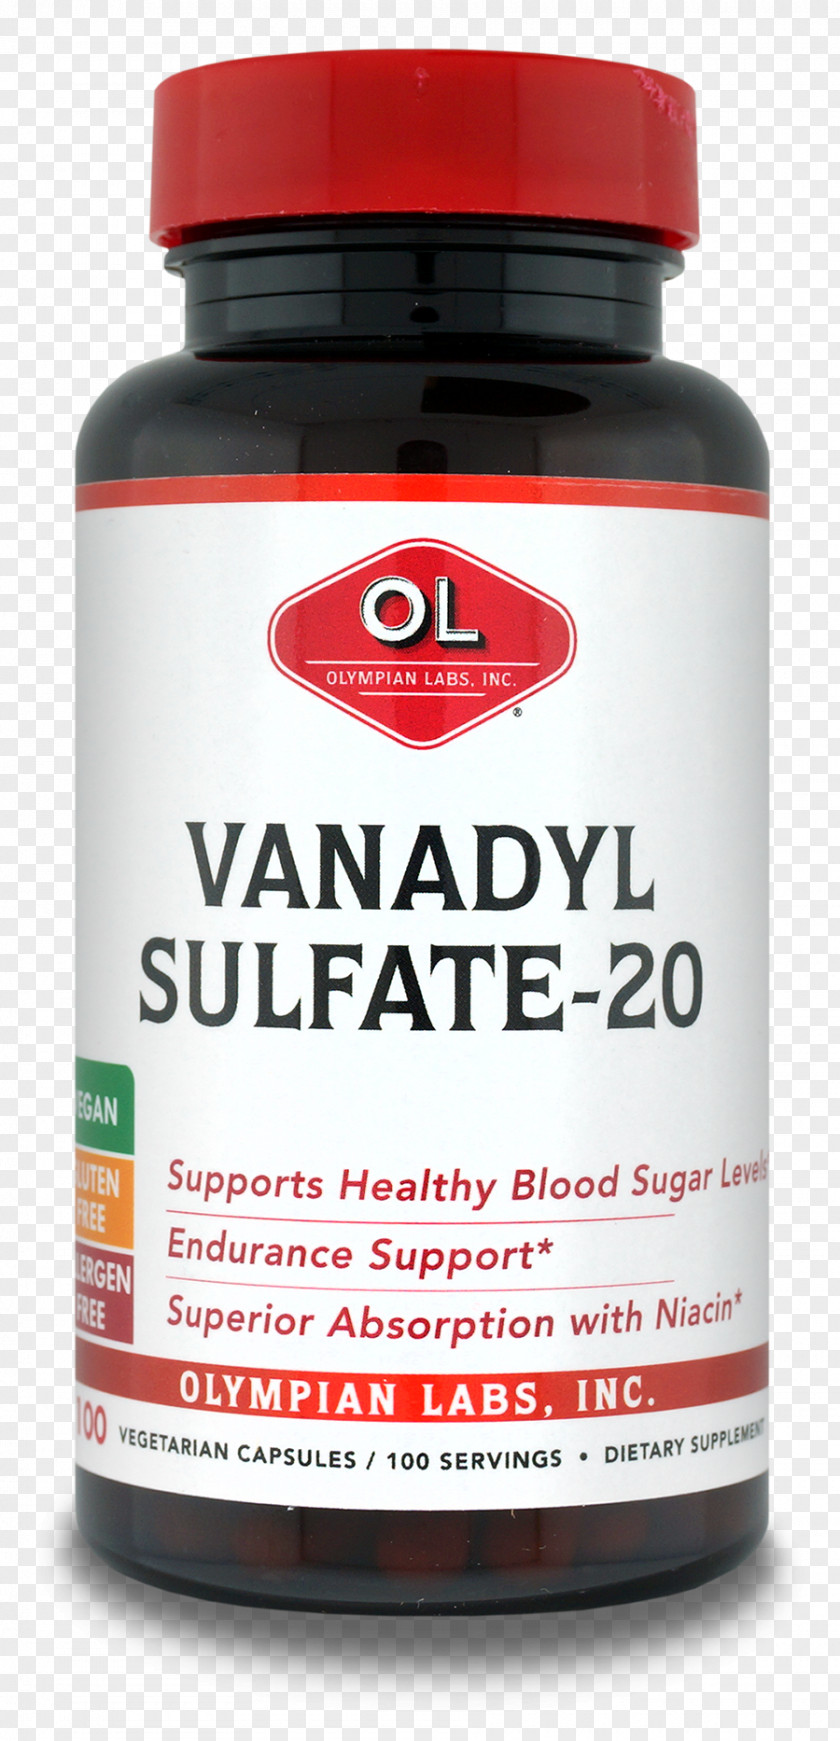 Vanadyl Sulfate Dietary Supplement Ion Olympian Labs, Inc. PNG